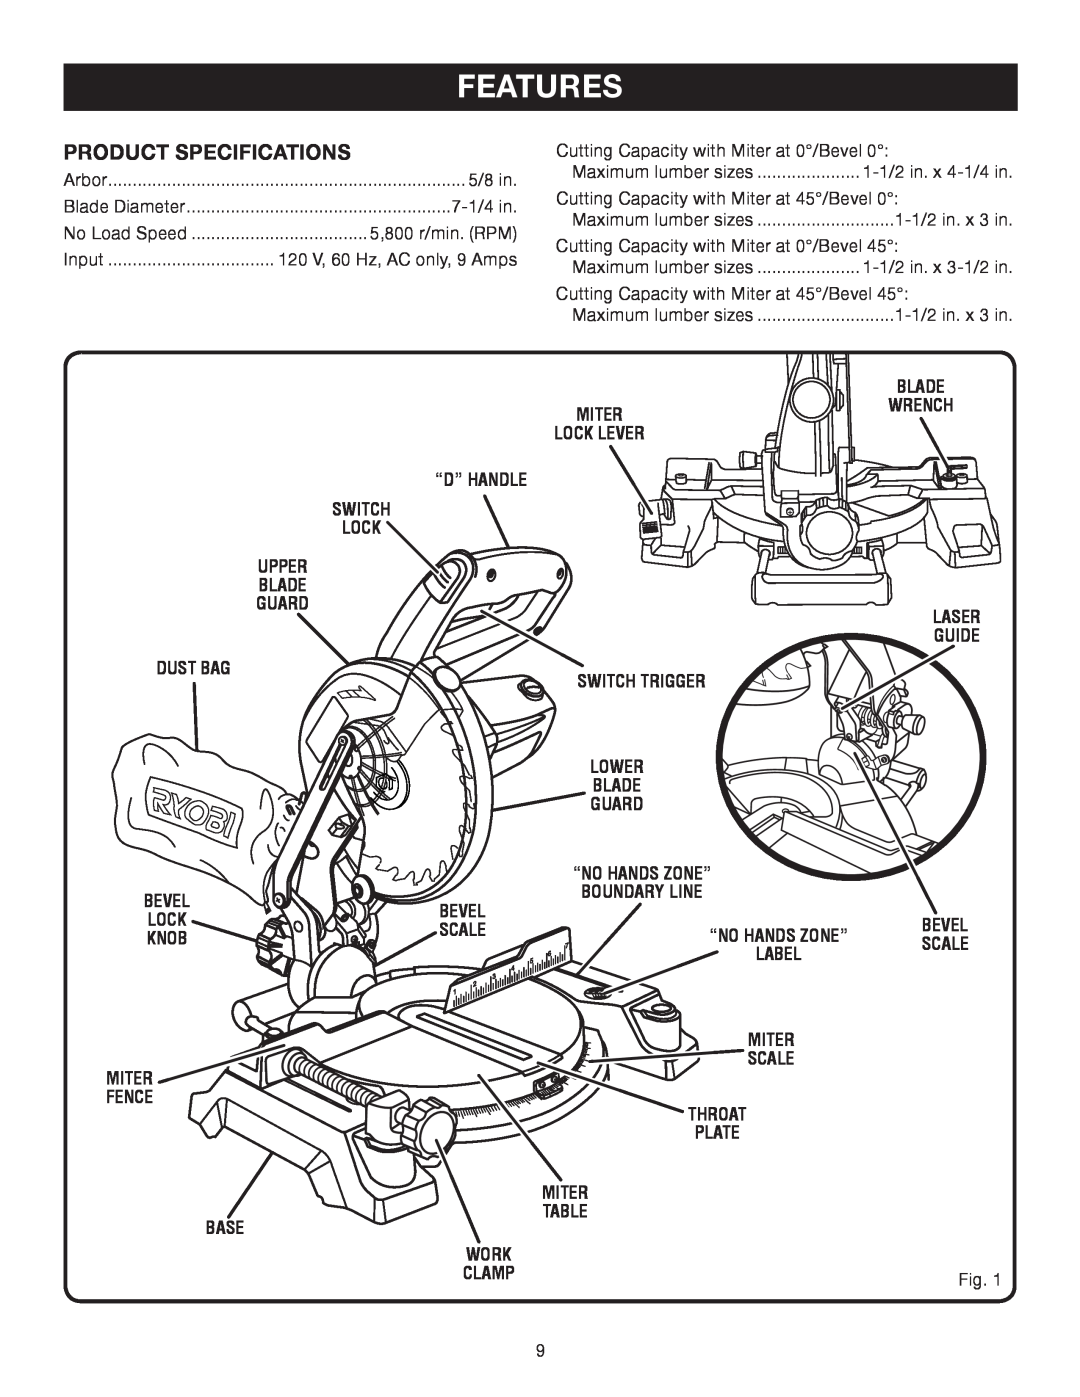 Ryobi TS1141 manual Features, Product Specifications 